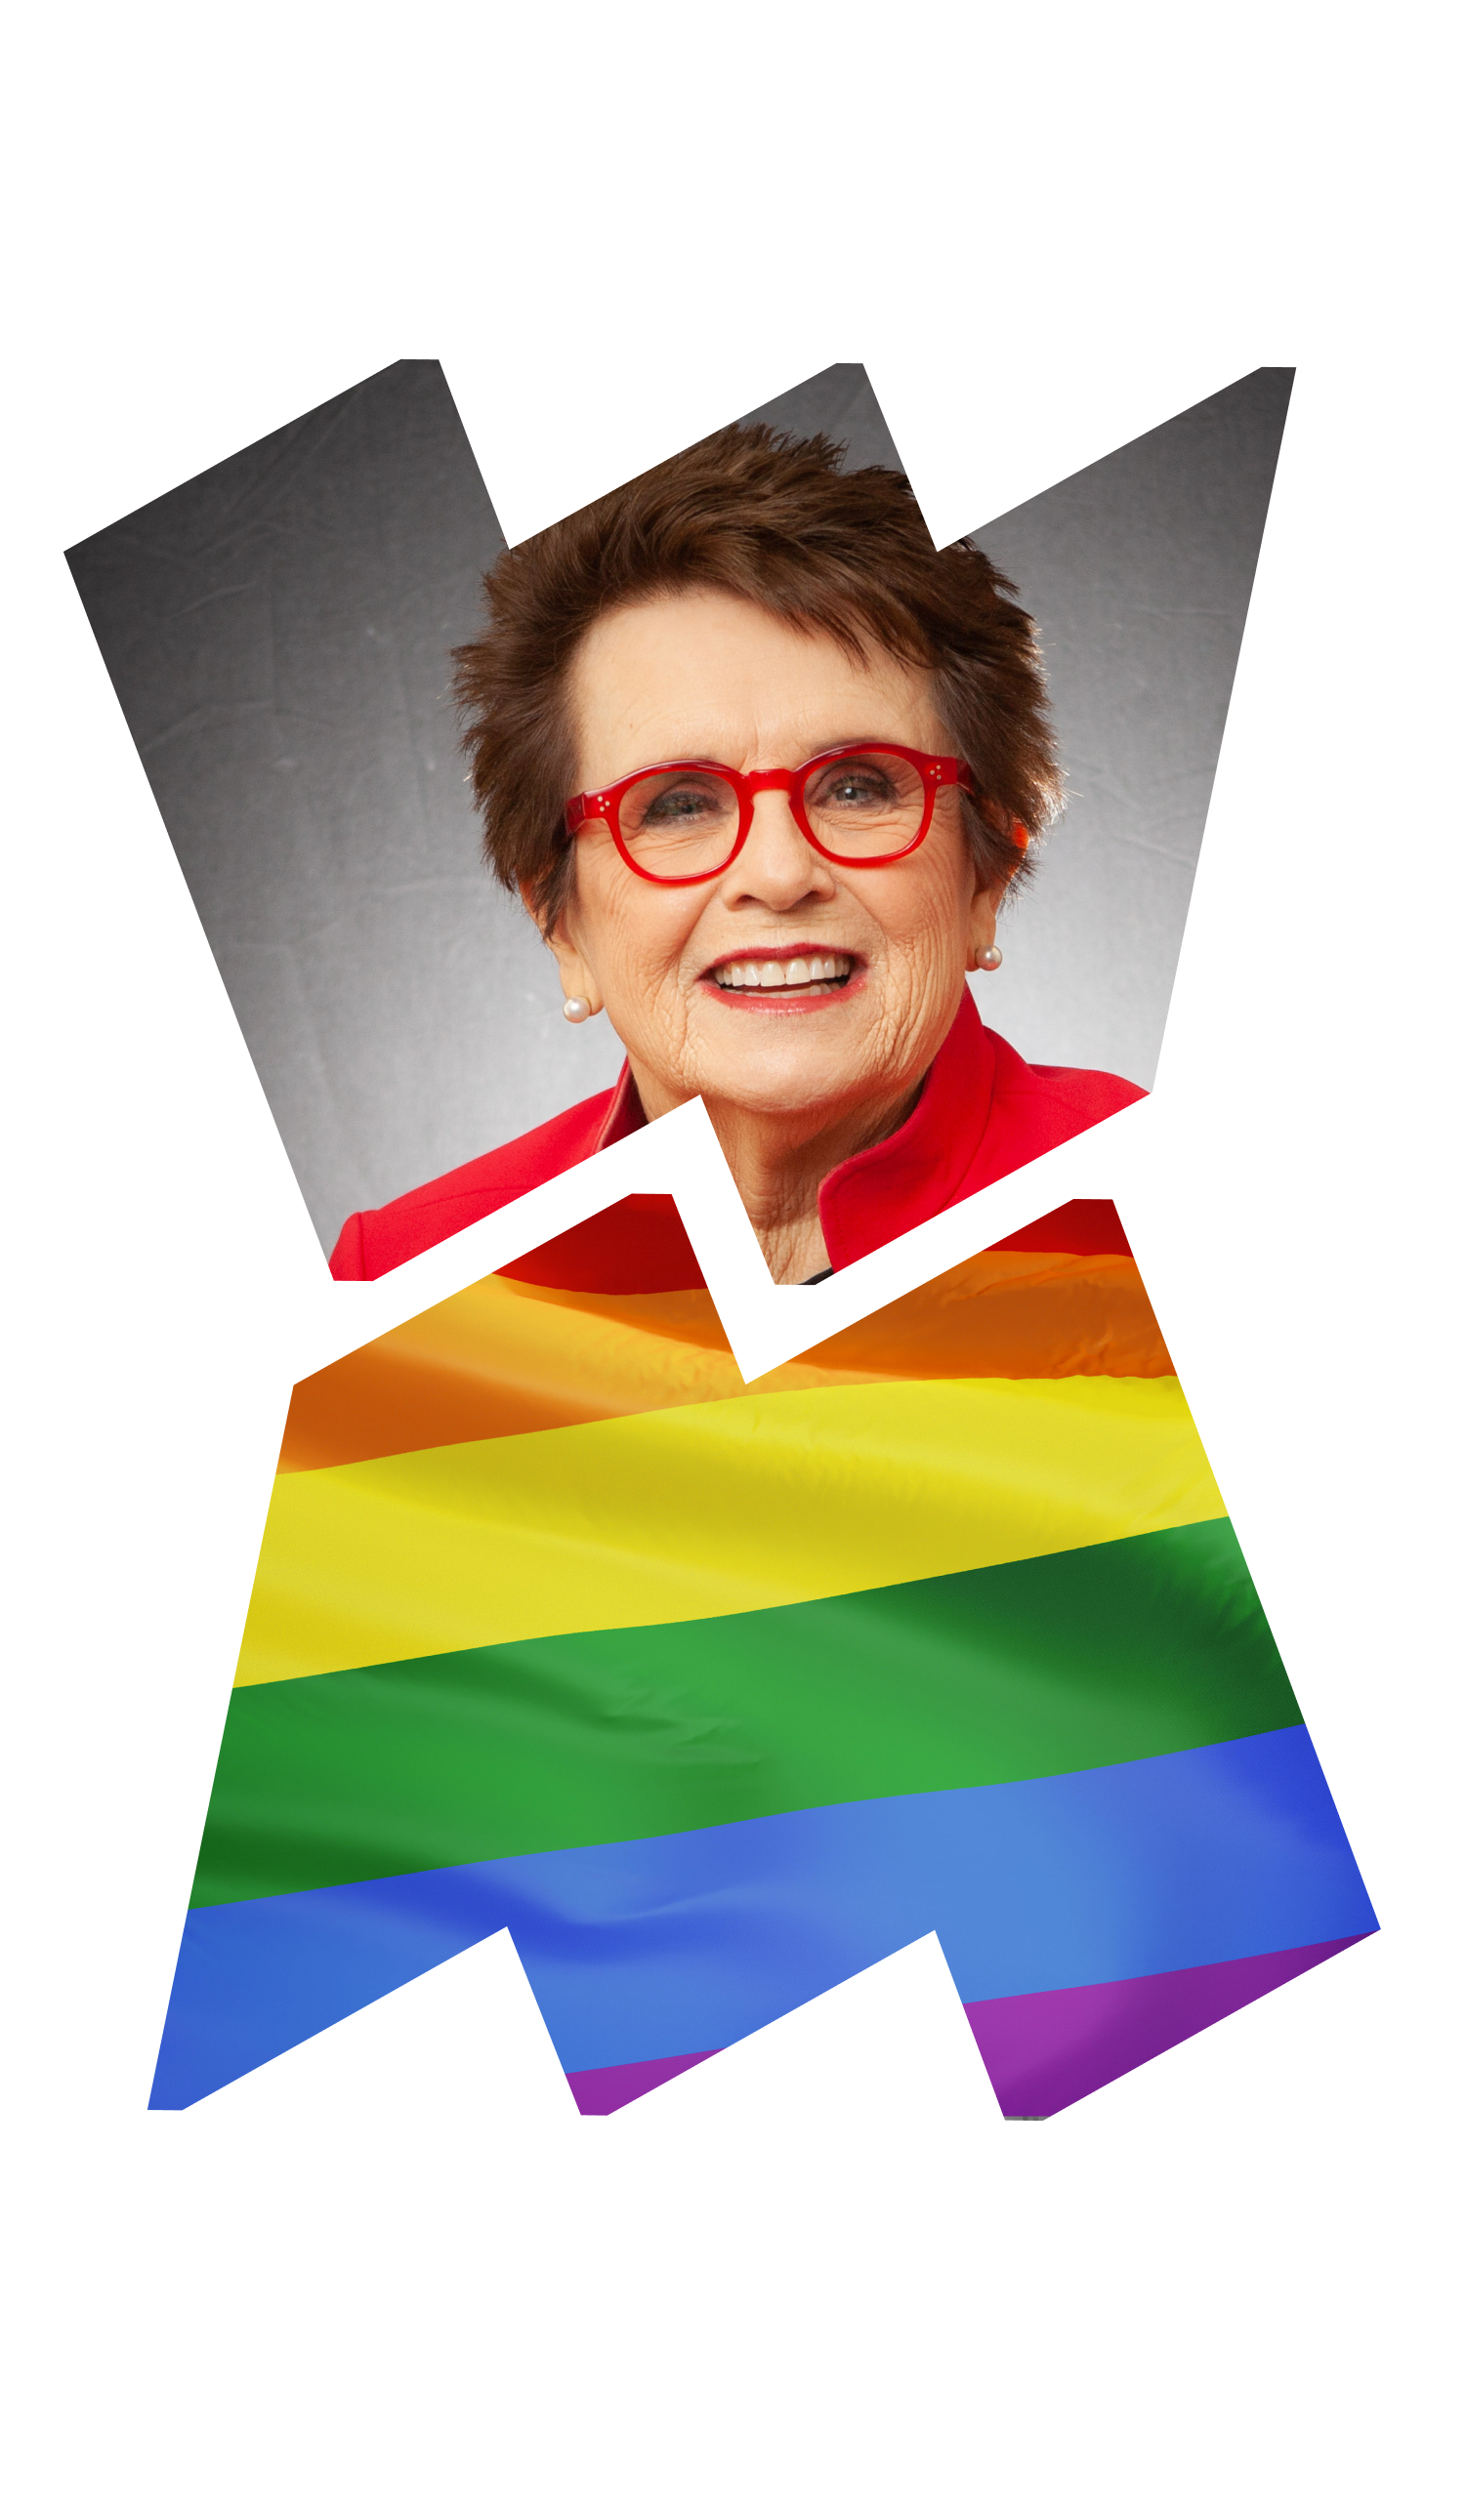 Current headshot of Billie Jean King in left "W" frame, rainbow flag in right "M" frame.